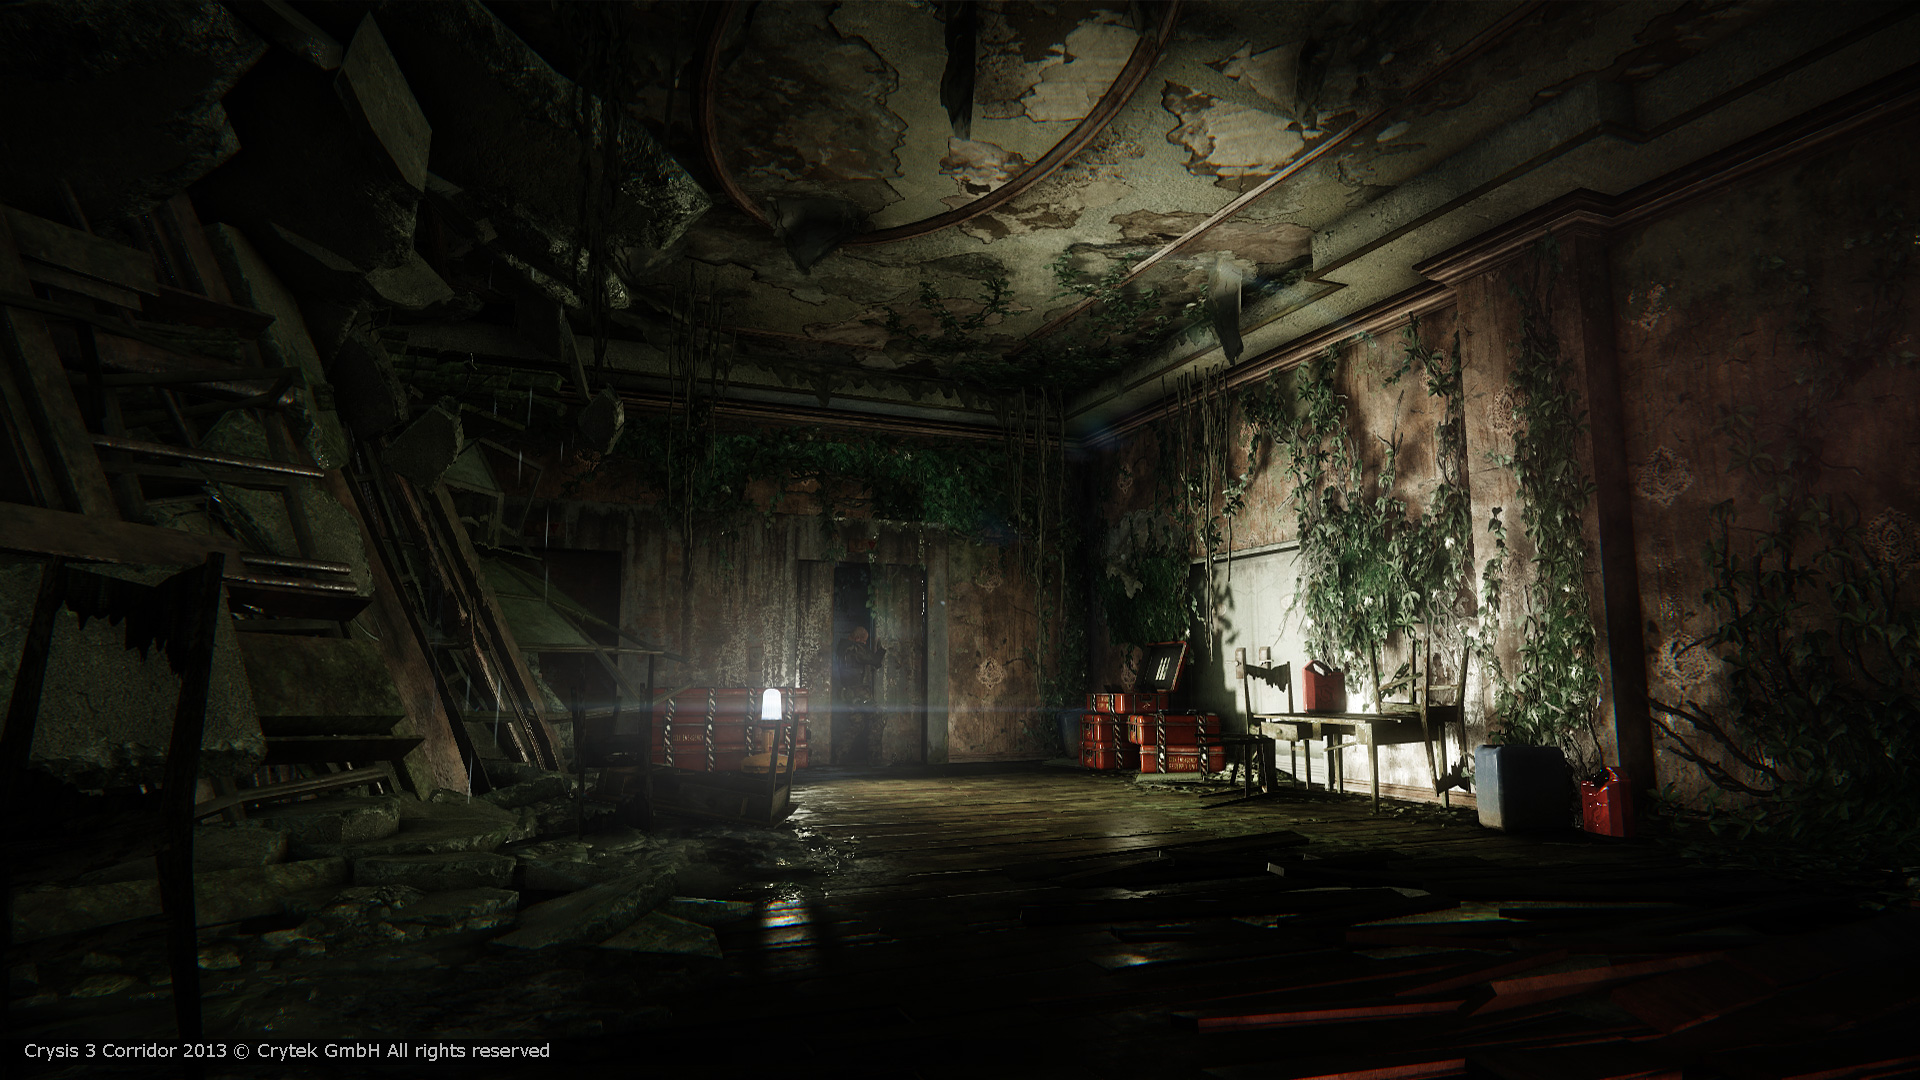 Crysis 3 environments — polycount